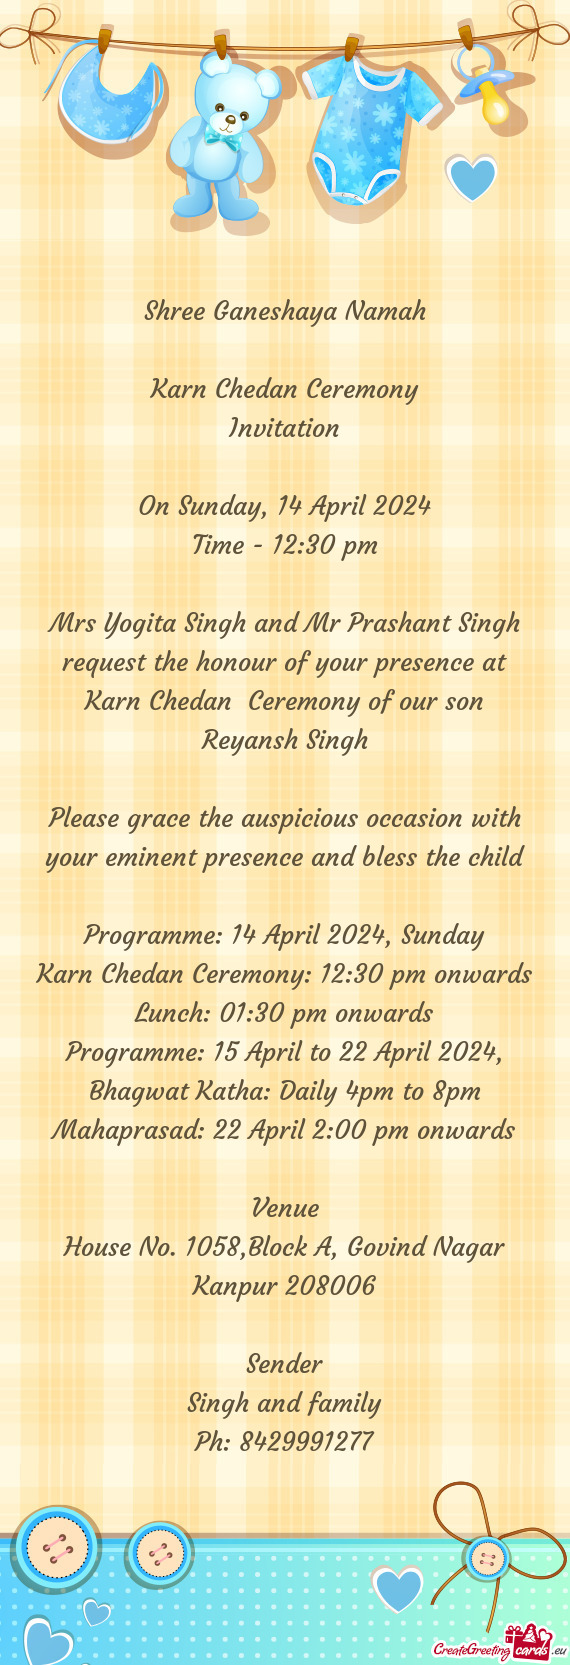 Mrs Yogita Singh and Mr Prashant Singh request the honour of your presence at Karn Chedan Ceremony